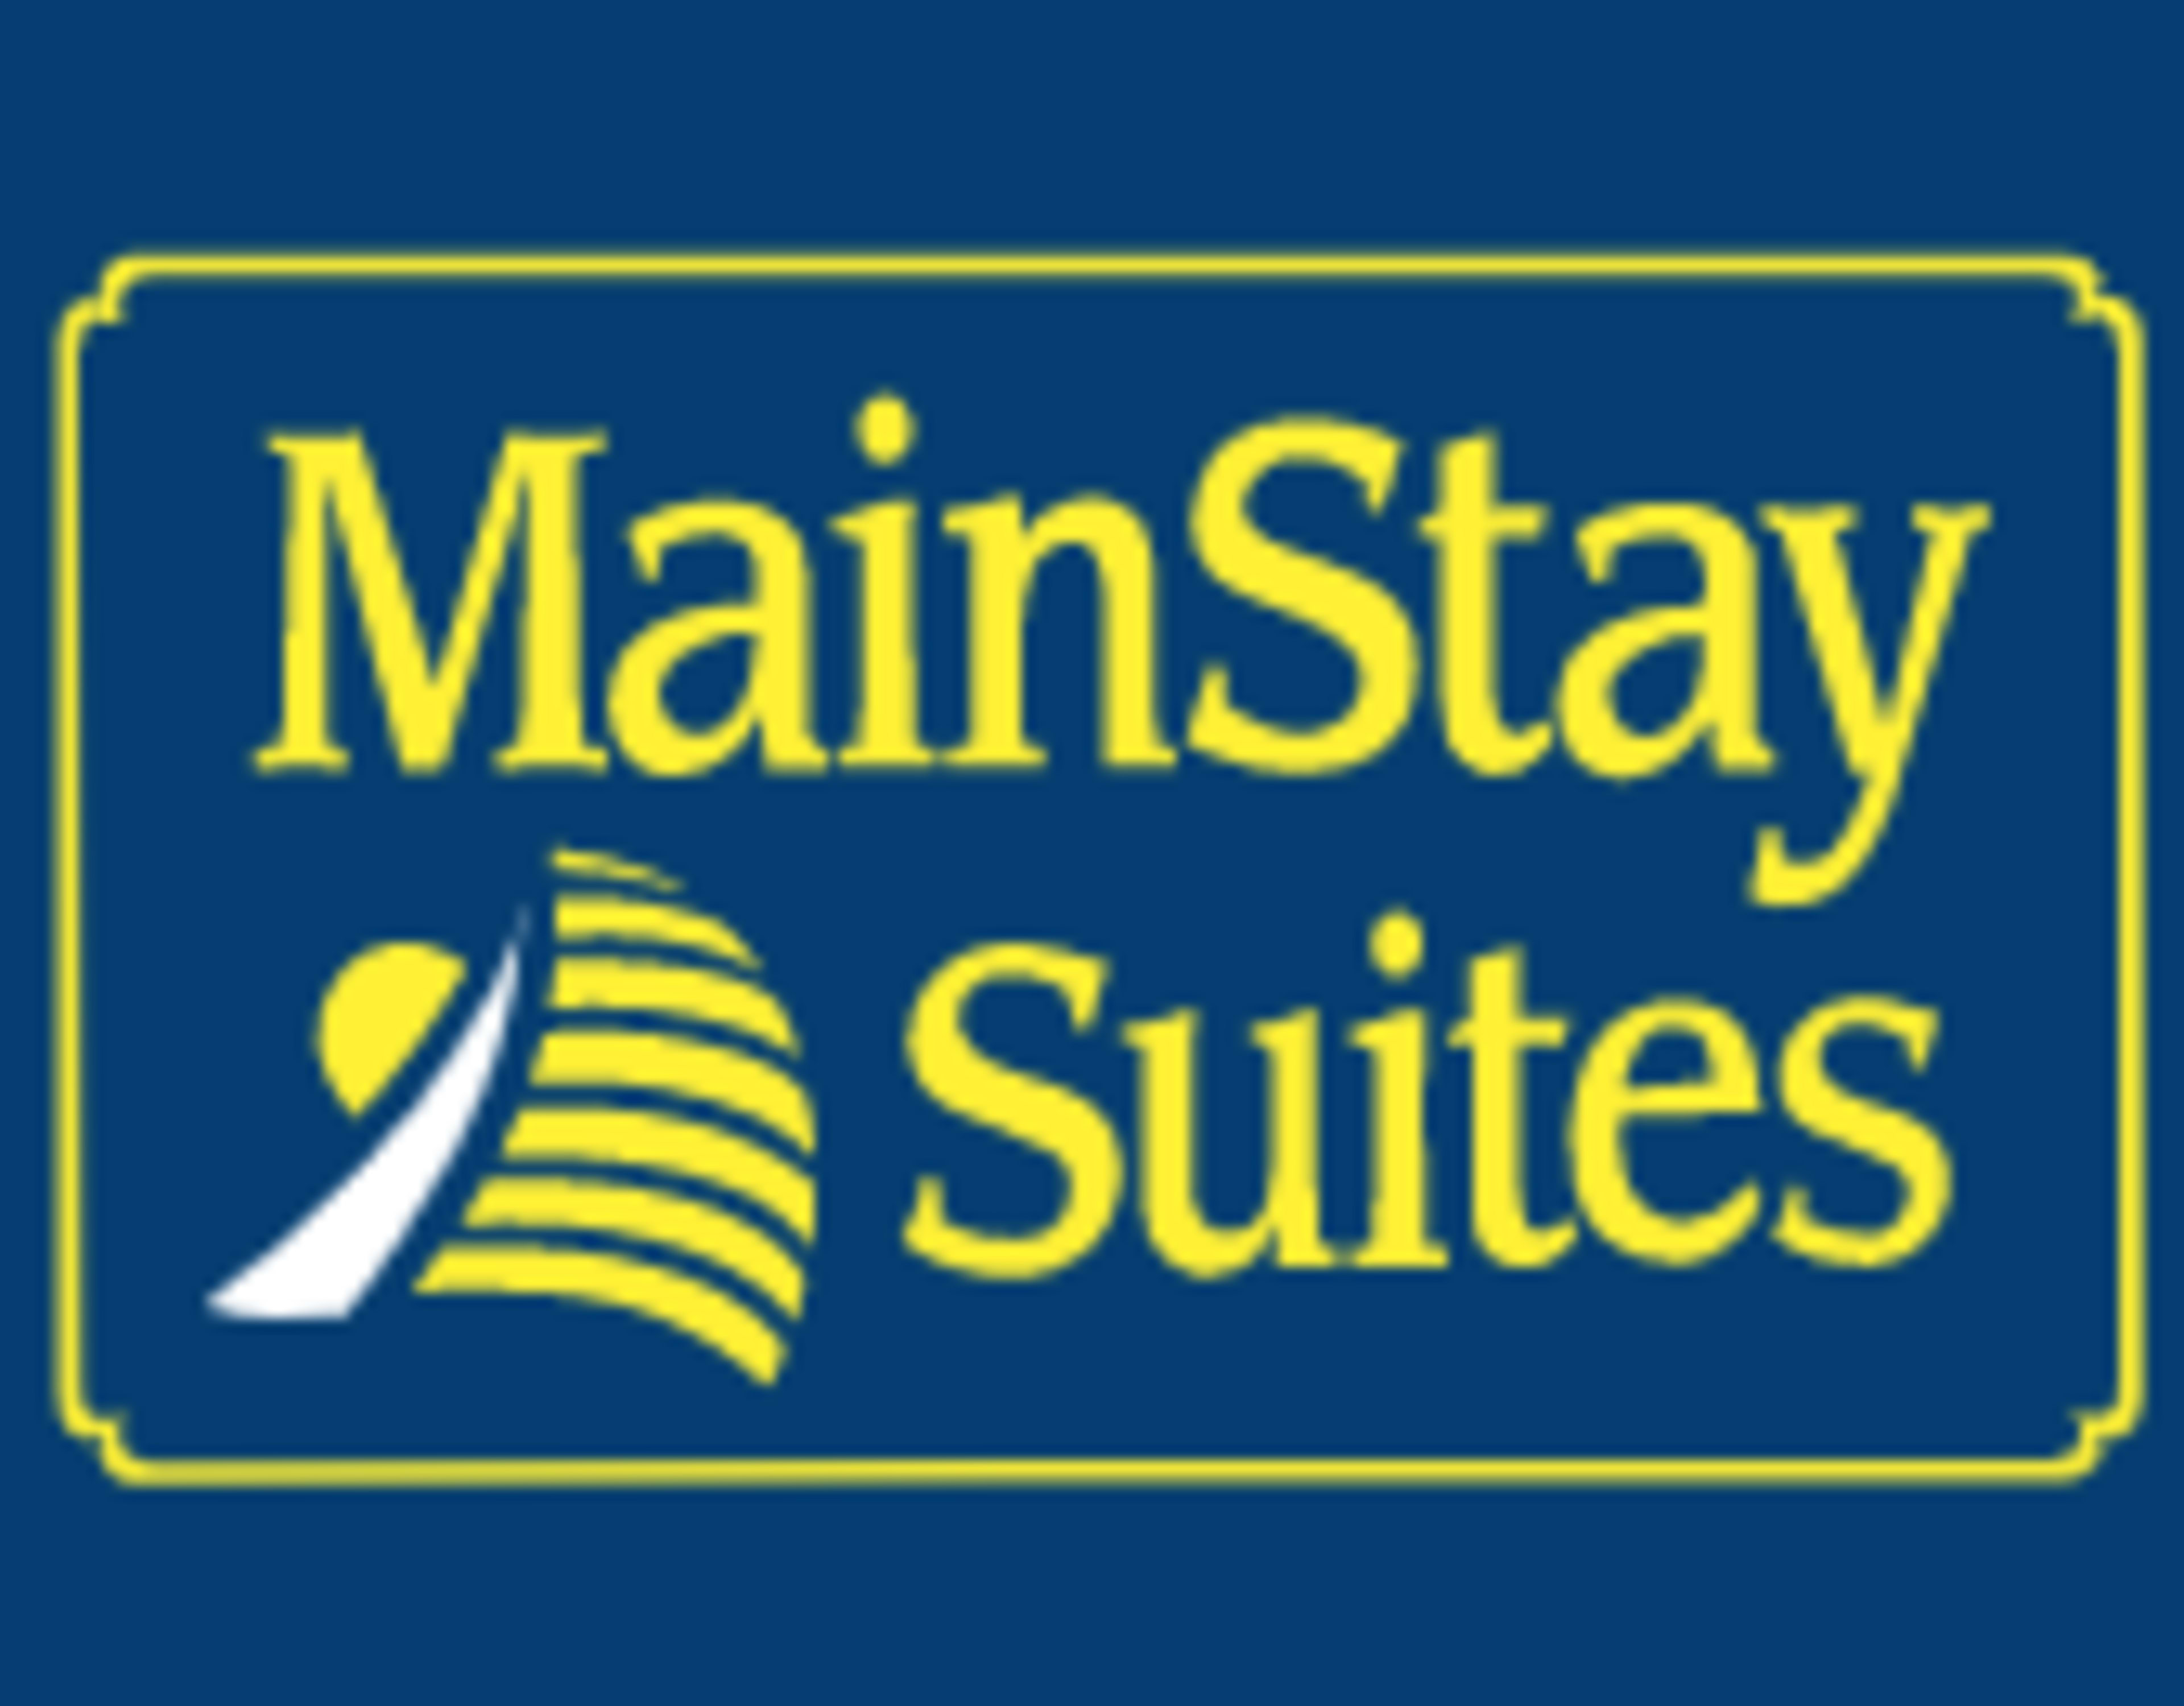 Mainstay Suites Code